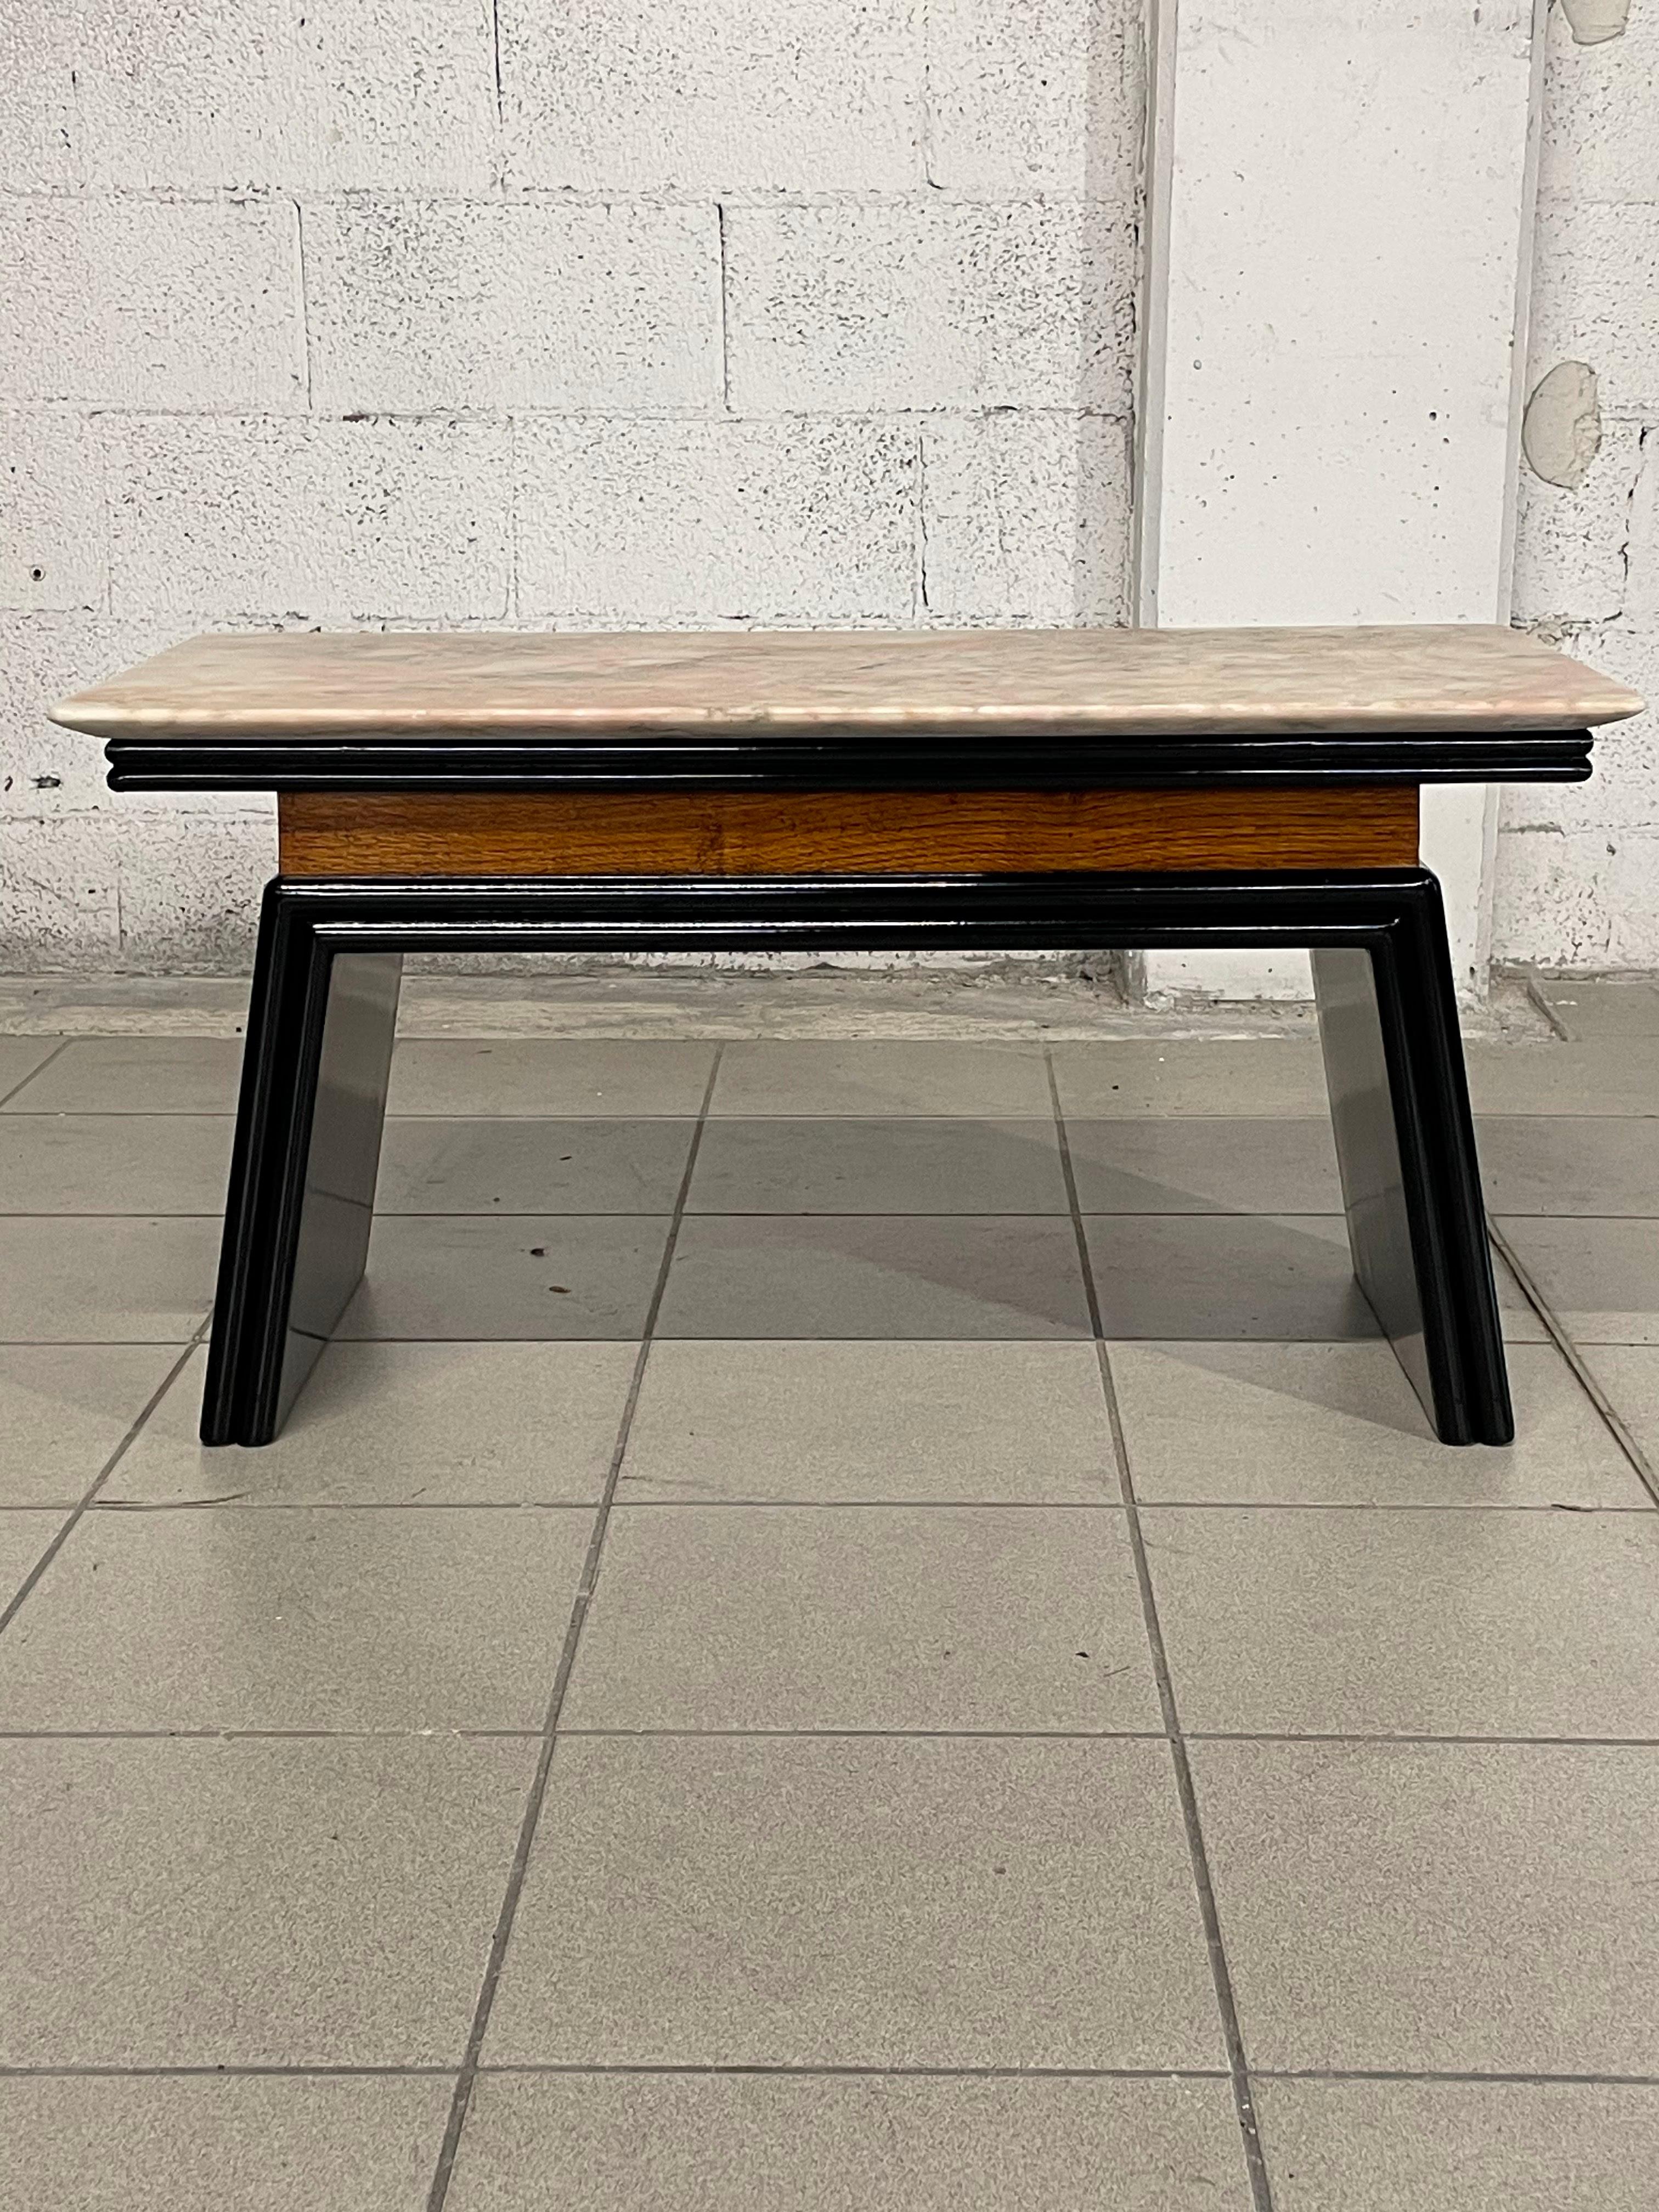 Precious 1940s-50s coffee table in the style of Osvaldo Borsani.
Wood and ebonized wood frame plus pink-grained marble top.

OF great elegance and character perfect even in more contemporary style environments.

Completely Restored.